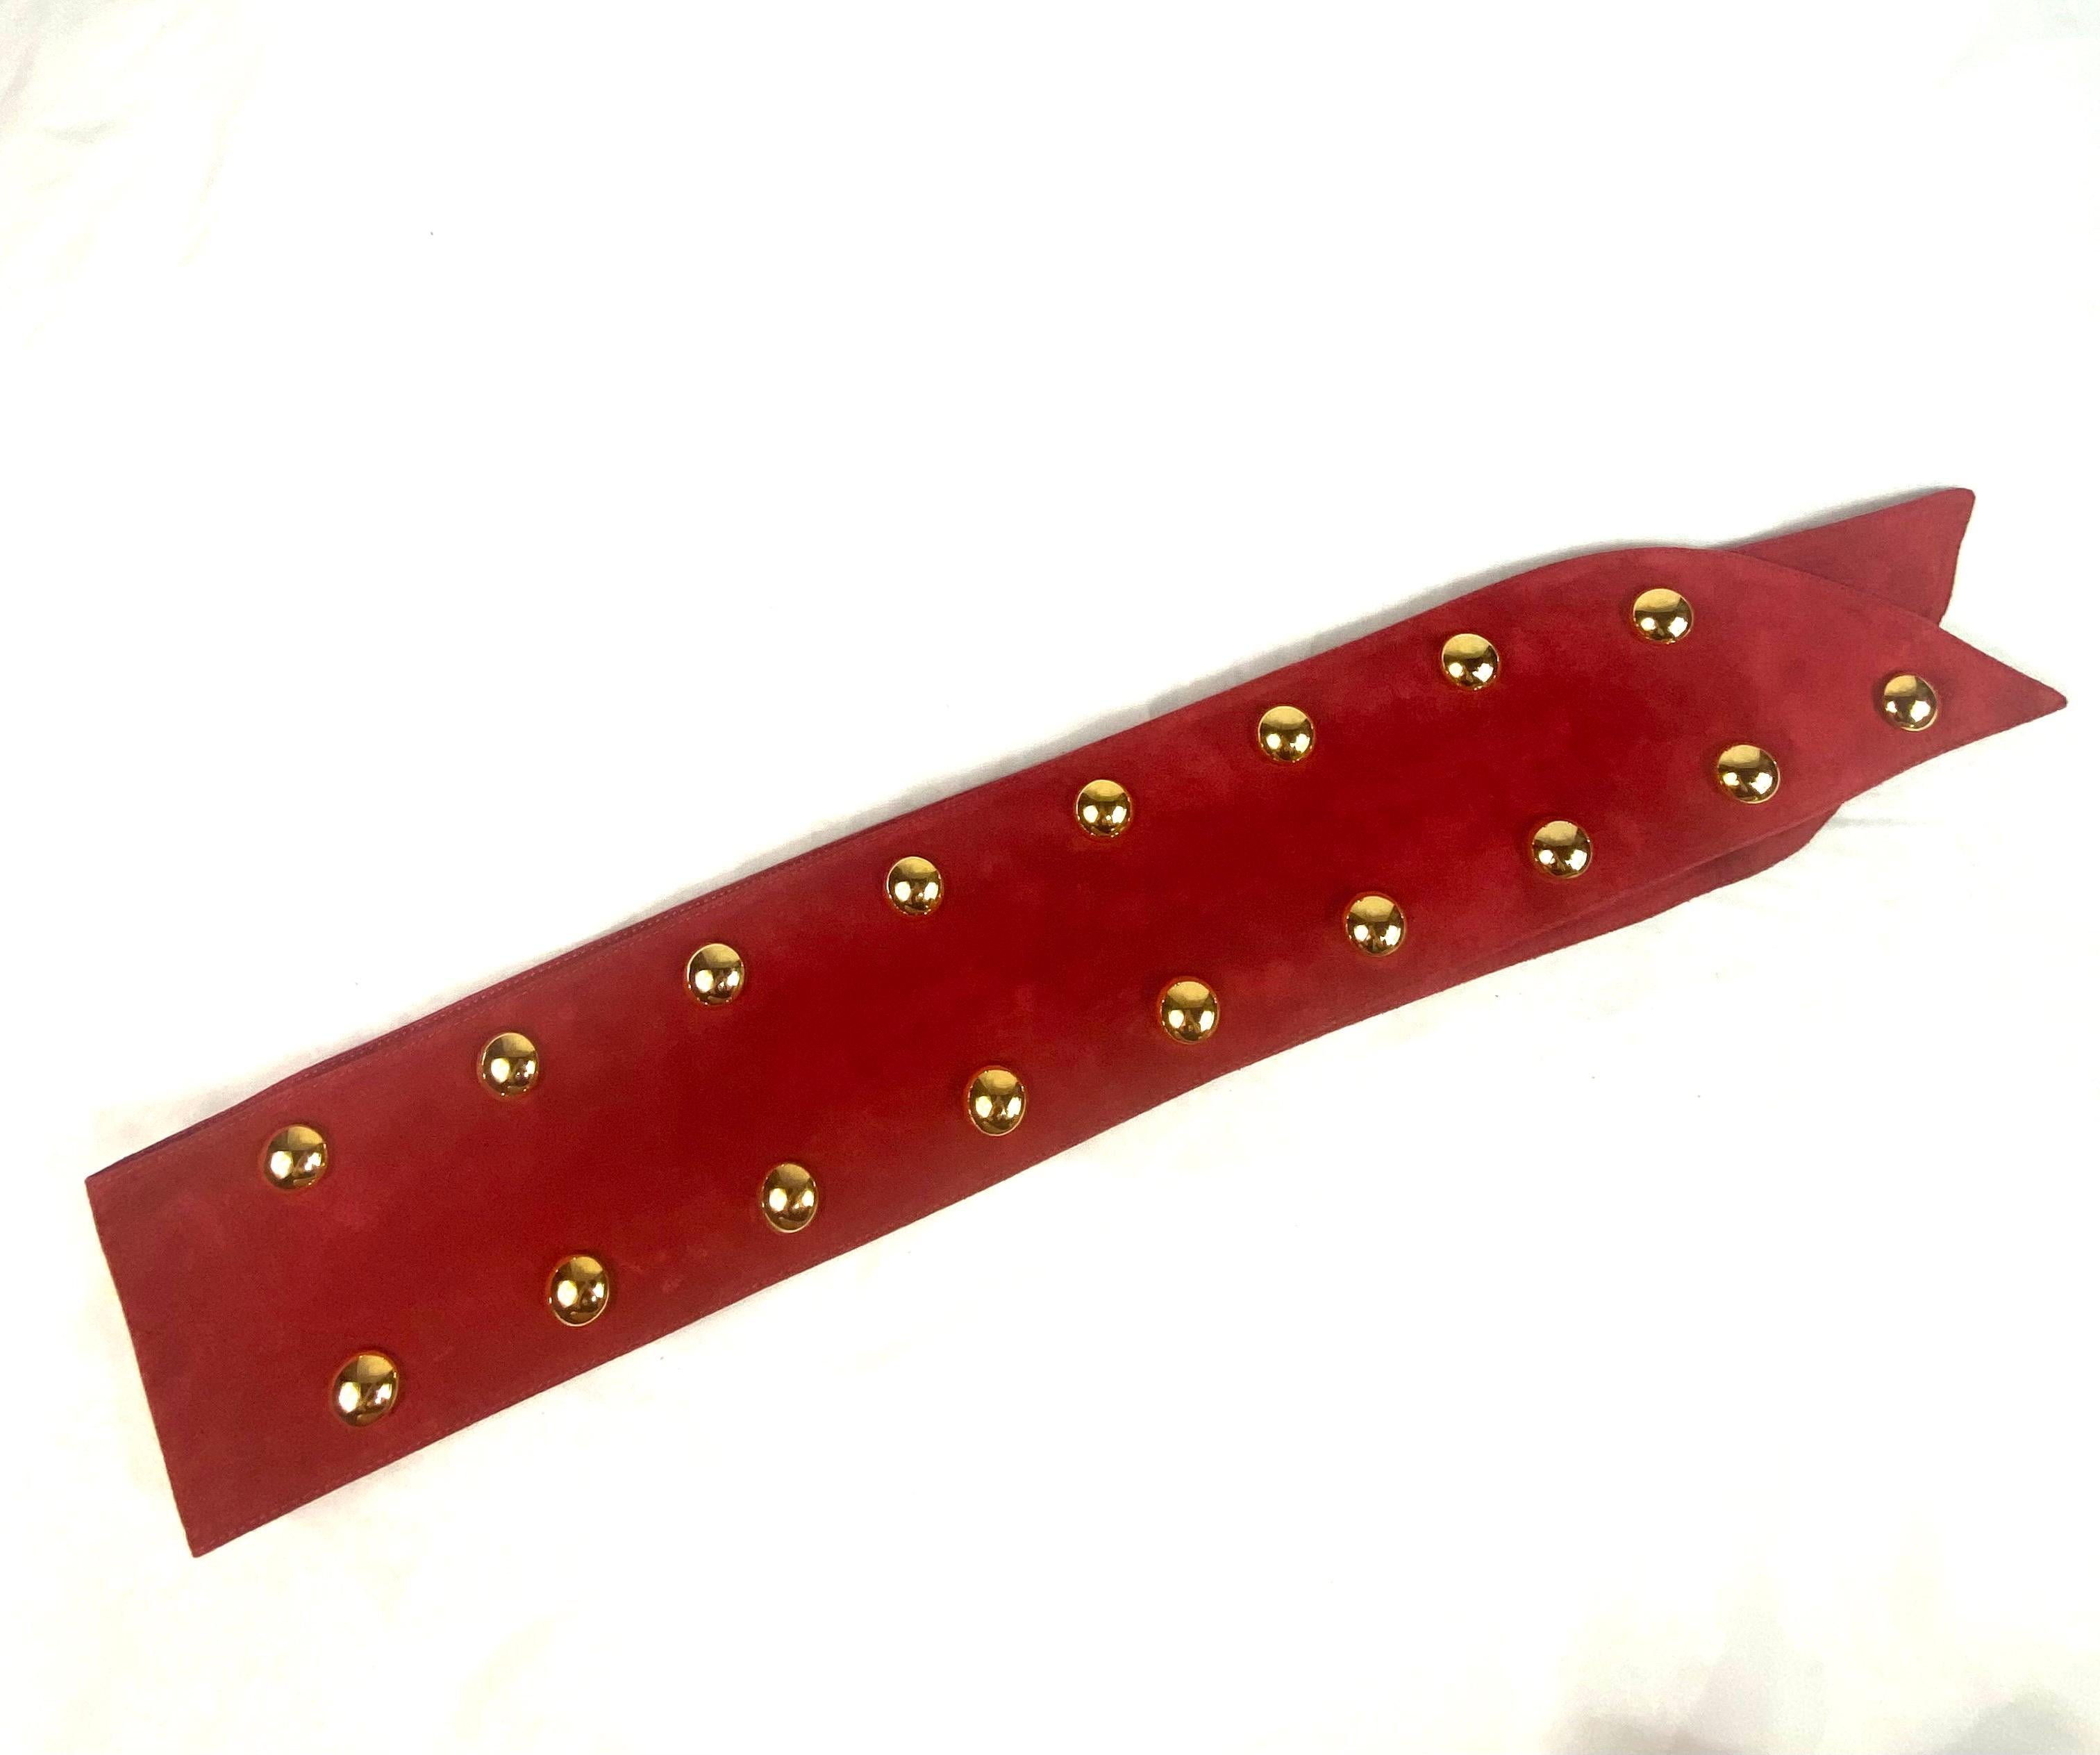 Yves Saint Laurent Rive Gauche Red and Gold Suede Wide Belt In Excellent Condition For Sale In Beverly Hills, CA